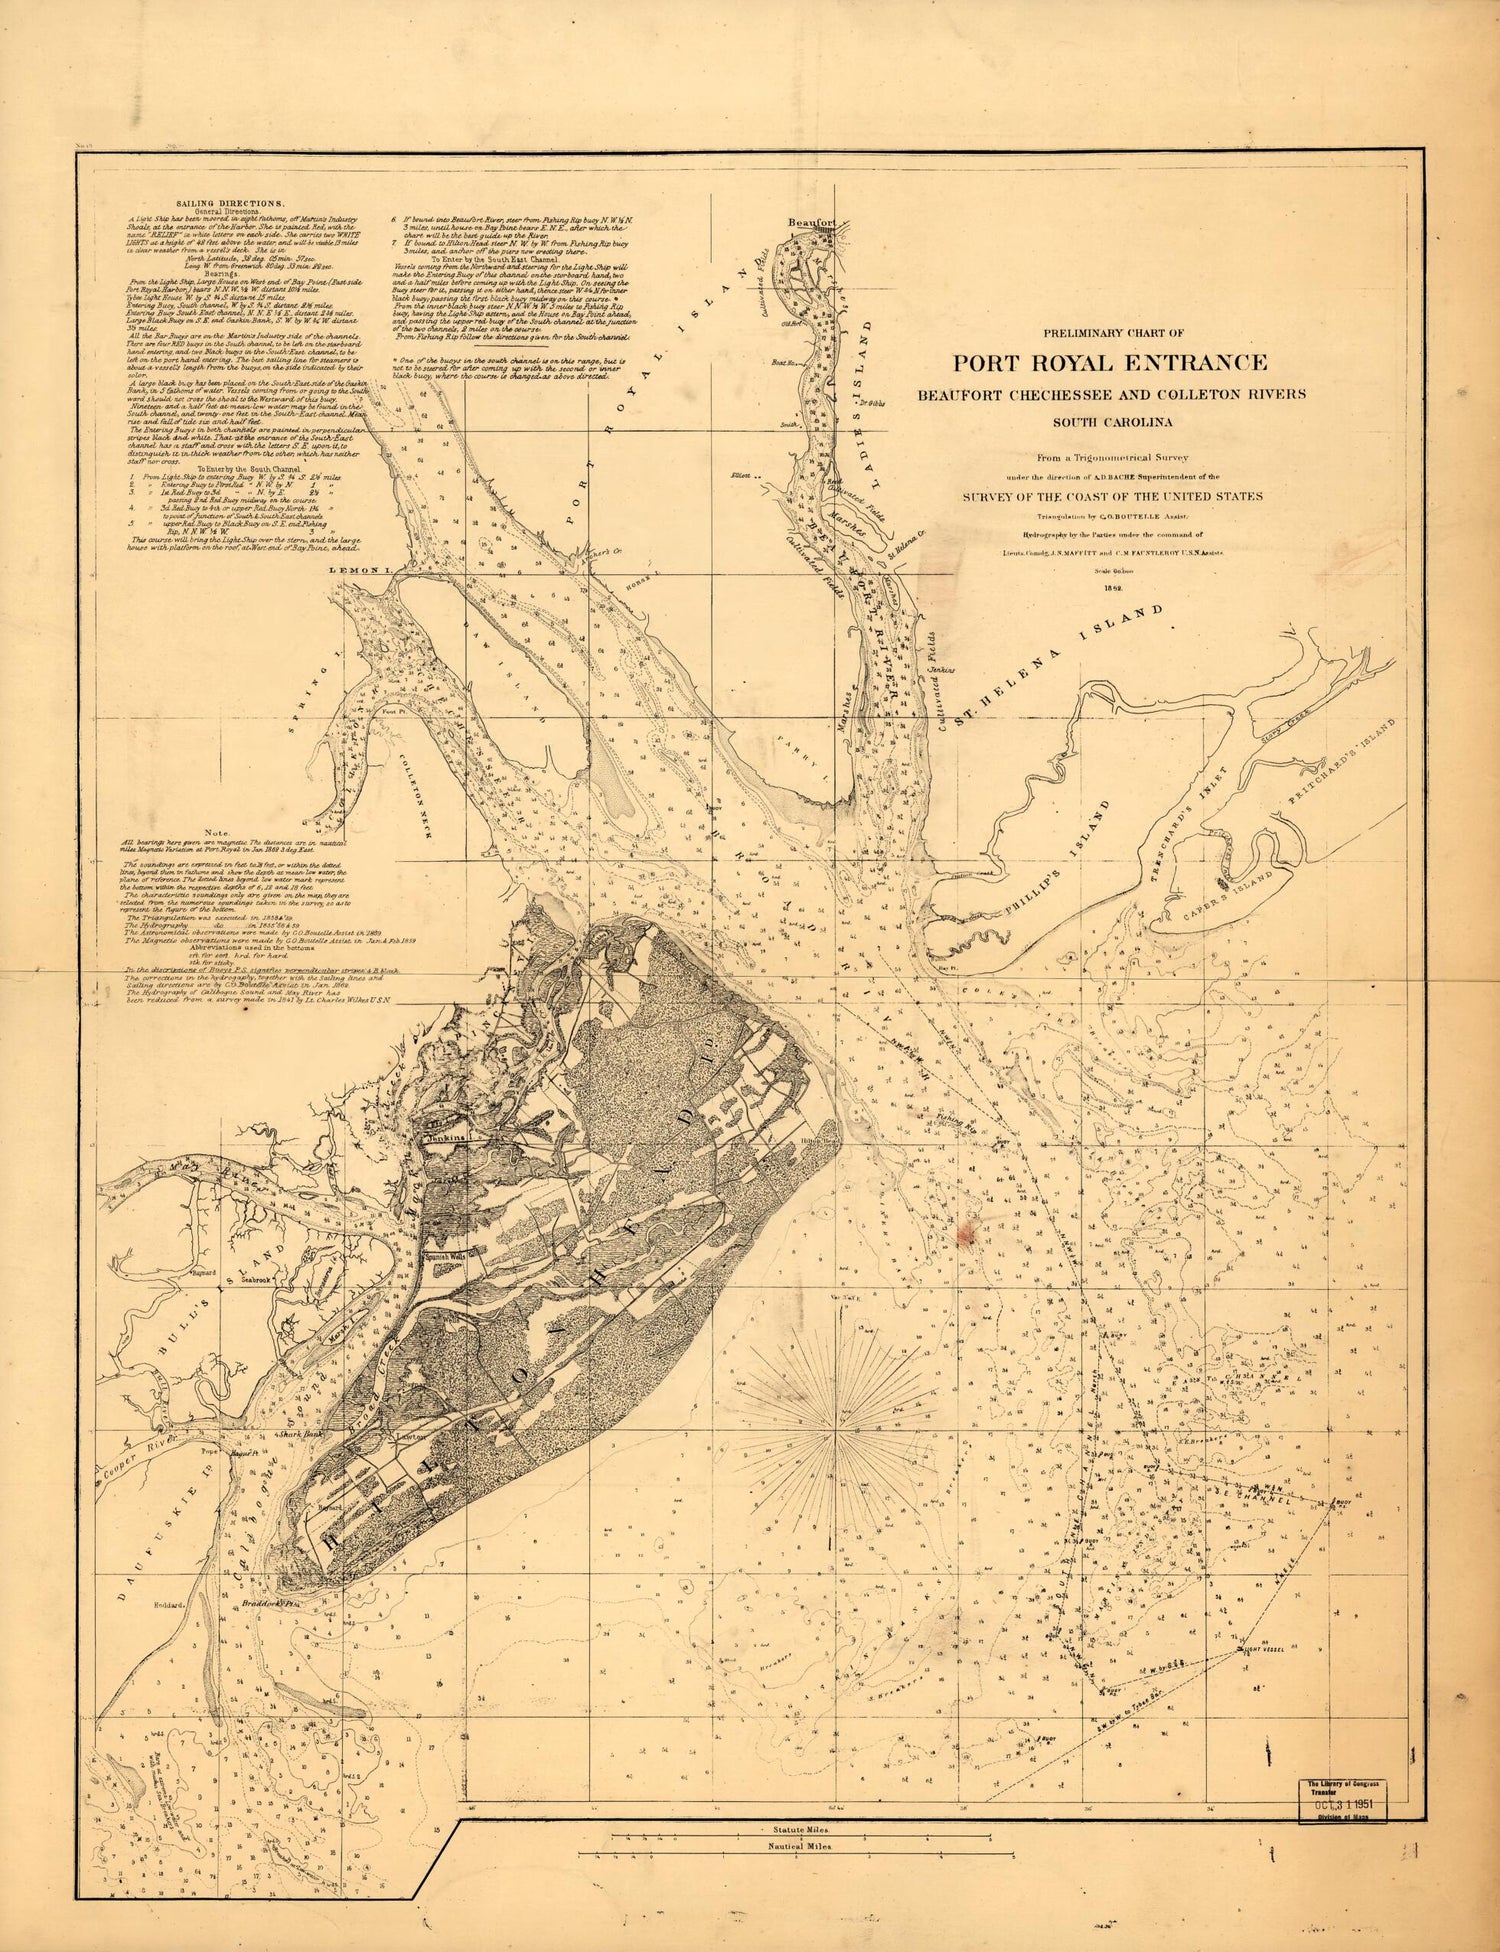 This old map of Preliminary Chart of Port Royal Entrance. Beaufort, Chechessee, and Colleton Rivers, South Carolina from 1862 was created by  United States Coast Survey in 1862